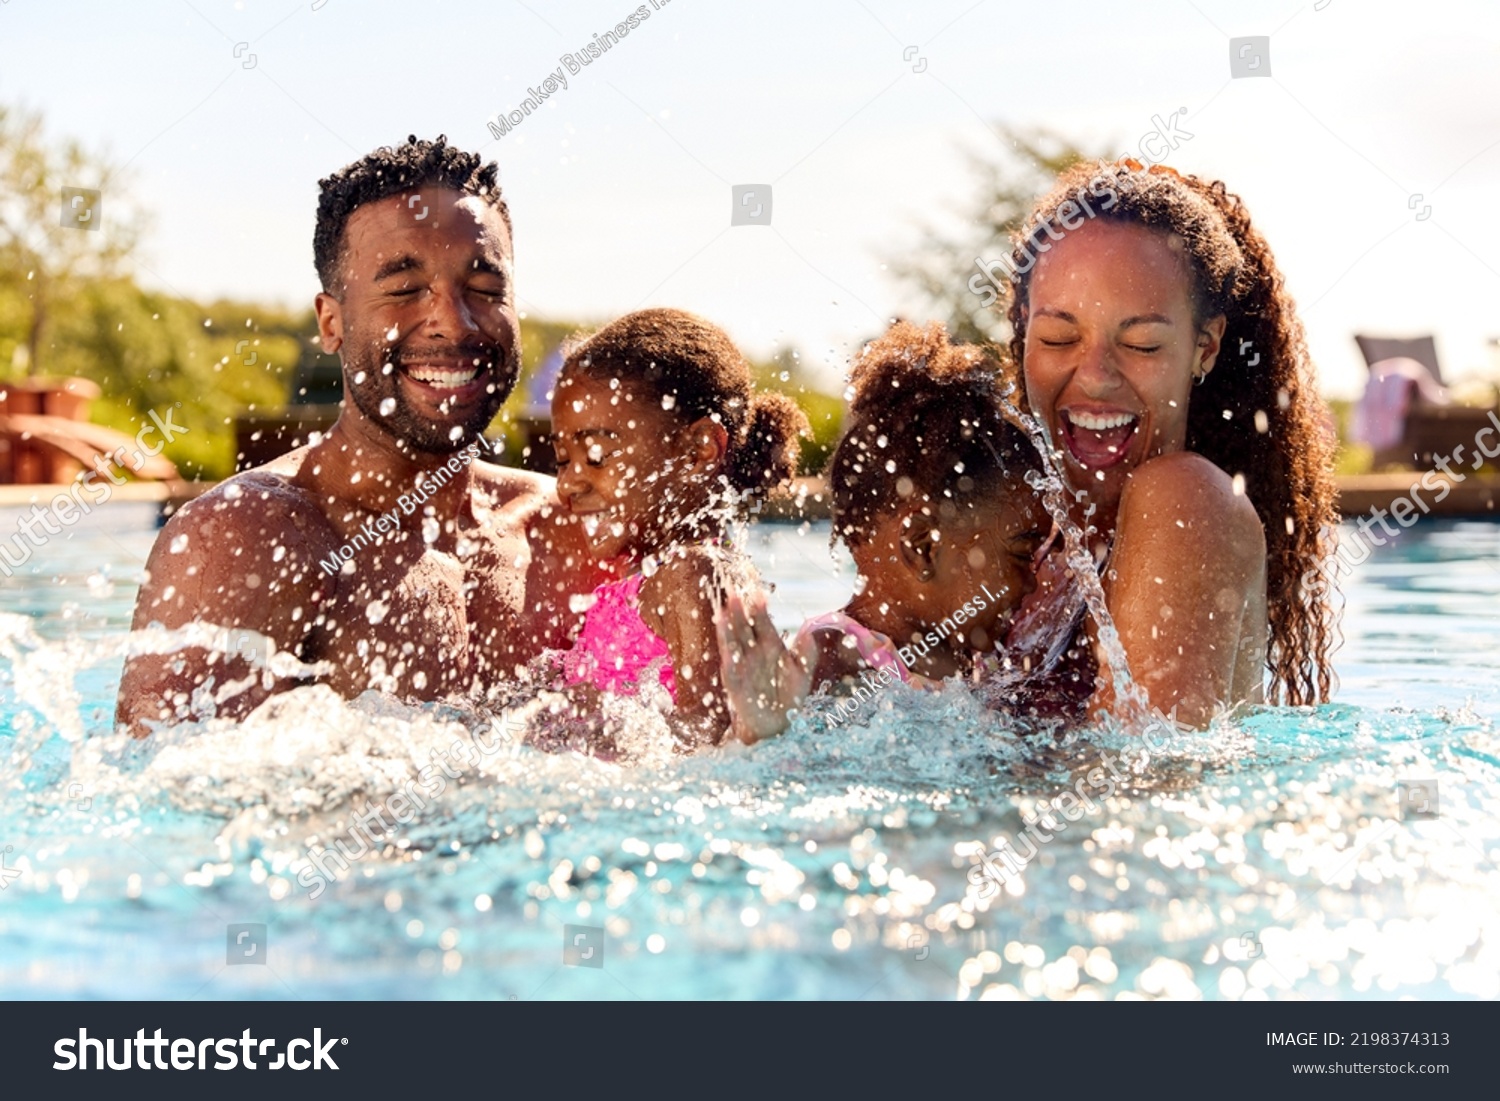 Family On Summer Holiday With Two Girls Being Held In Swimming Pool By Parents And Splashing #2198374313